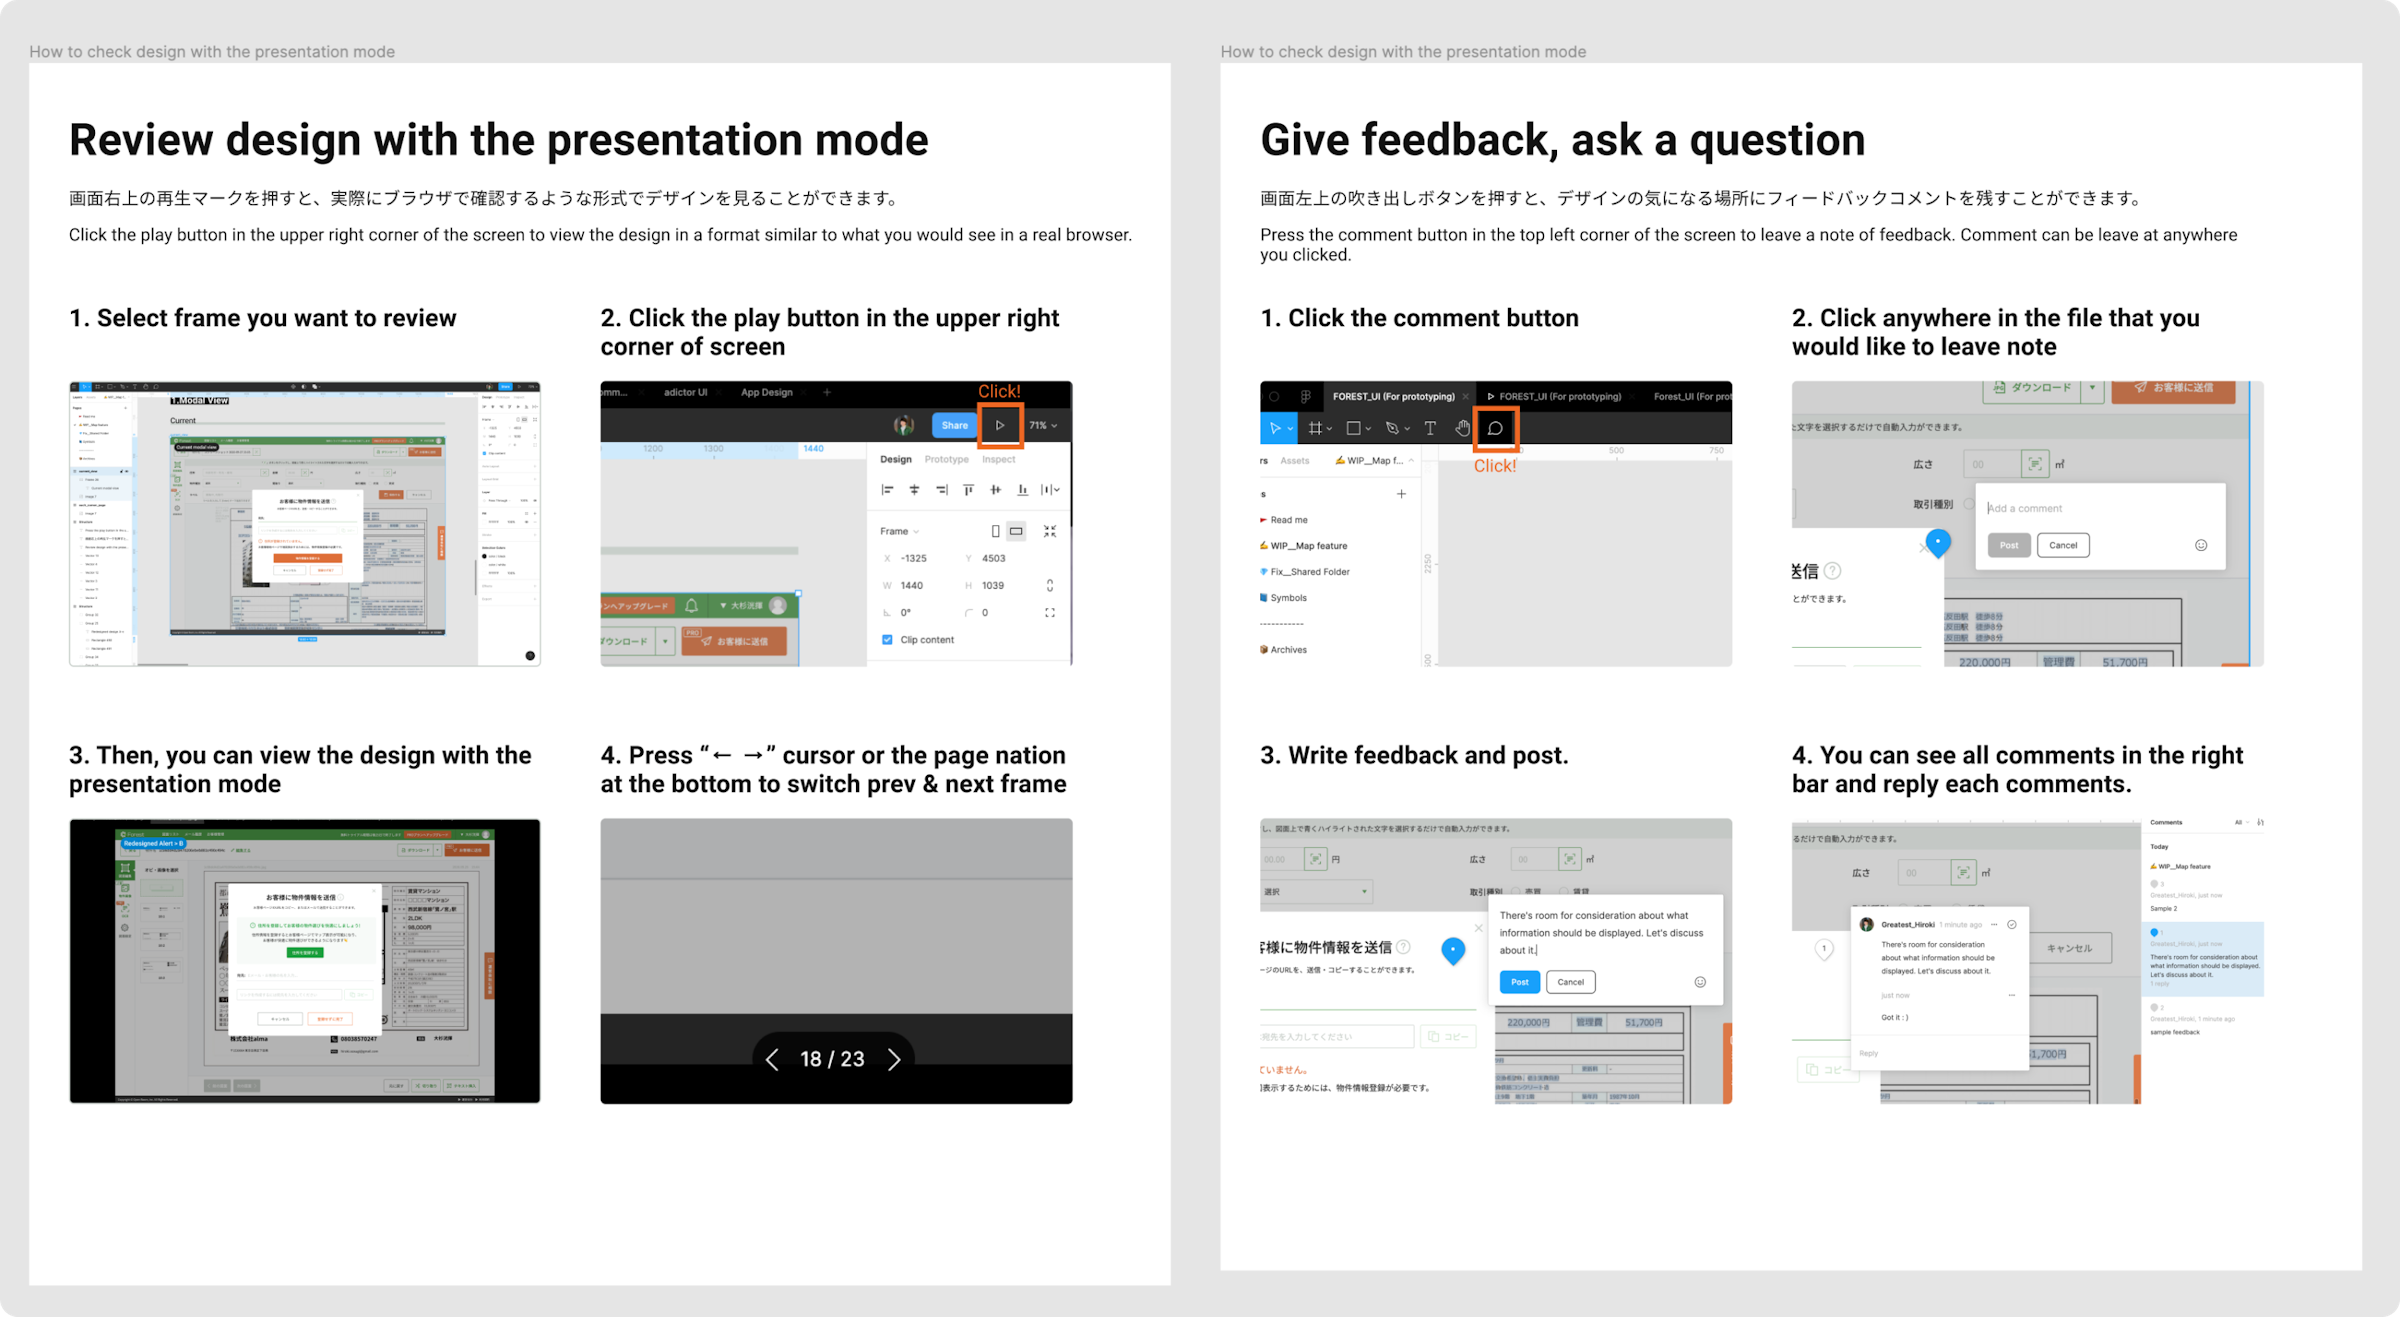 「Review design with the presentation mode」と「Give feedback,ask a question」の画像。それぞれが4枚の画像と共に手順が説明されている。